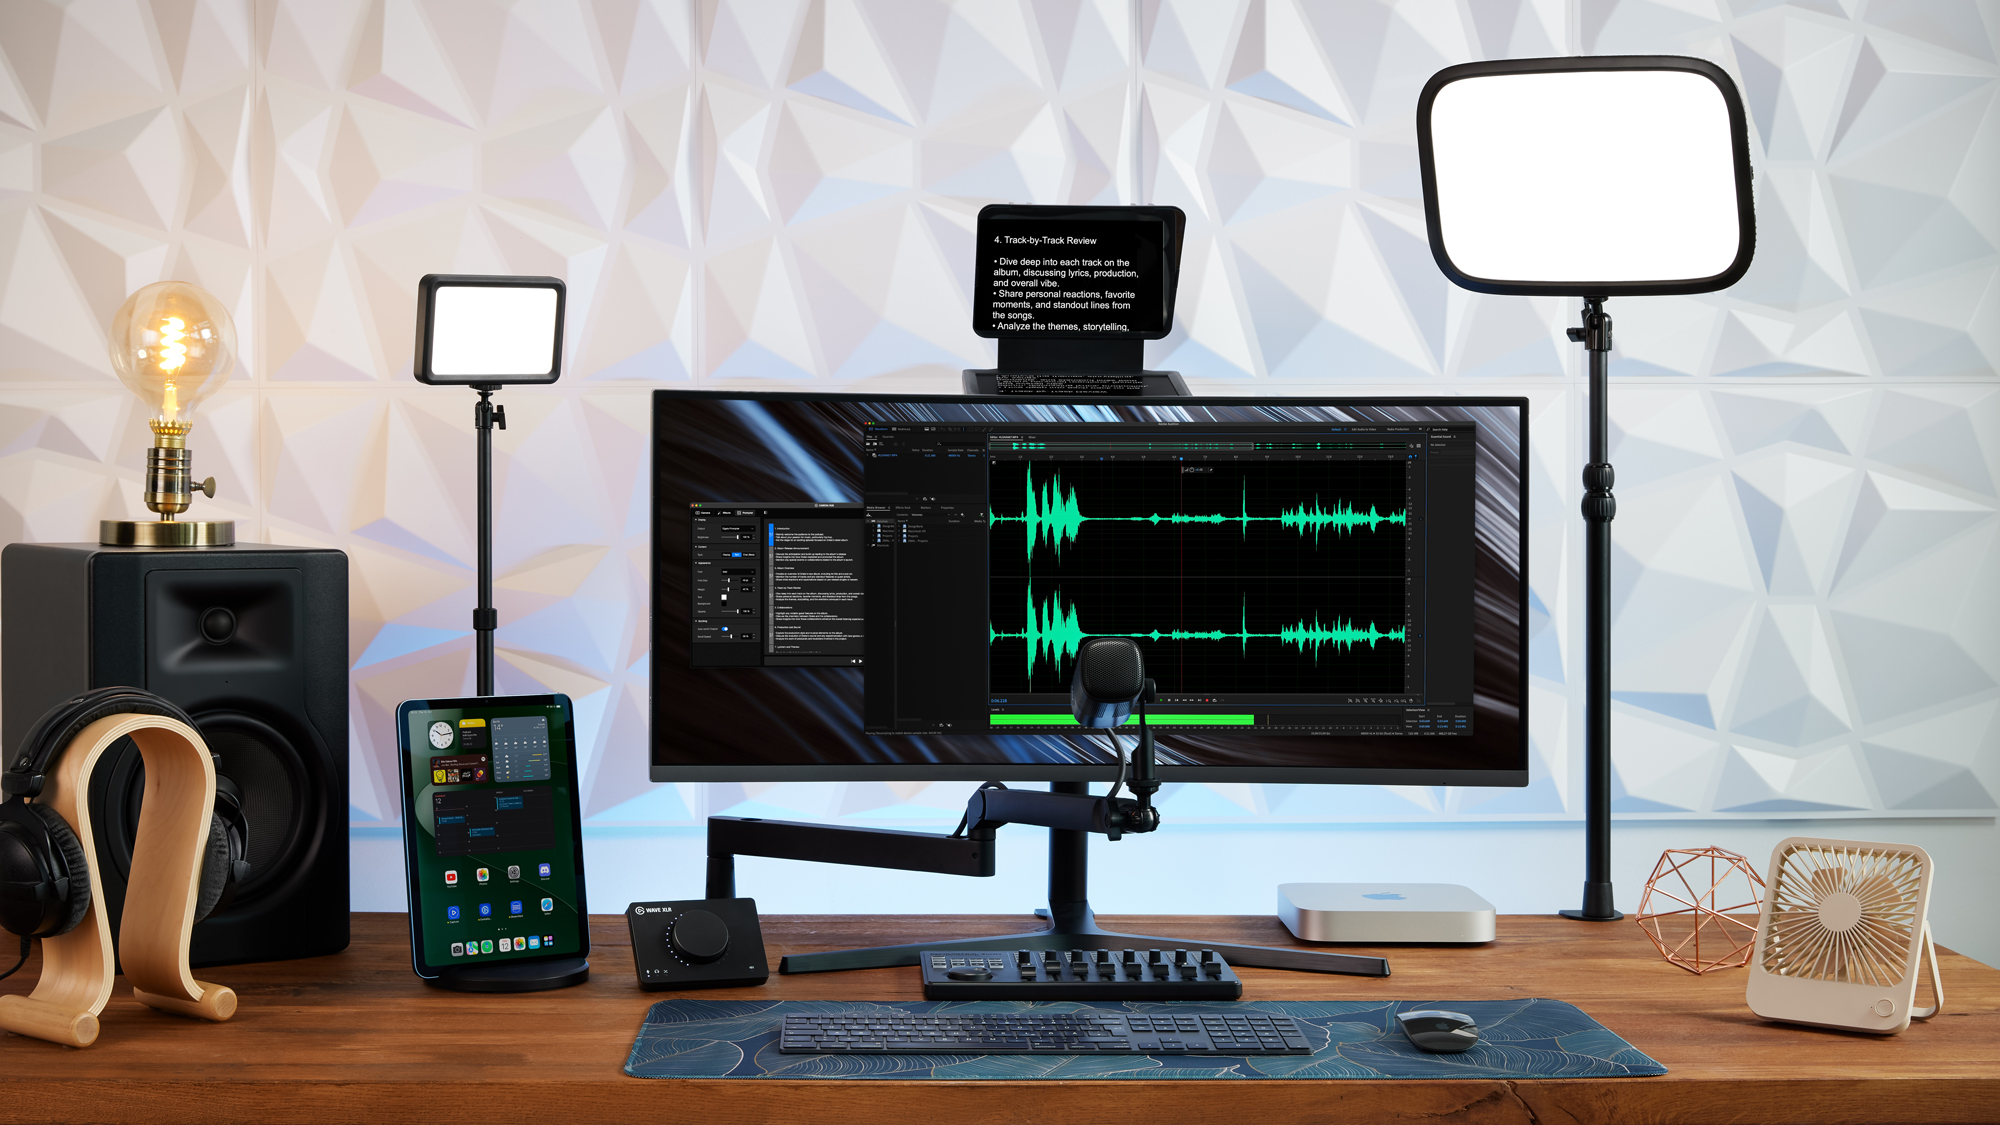 Elgato Prompter turns your streaming cam or webcam into a teleprompter